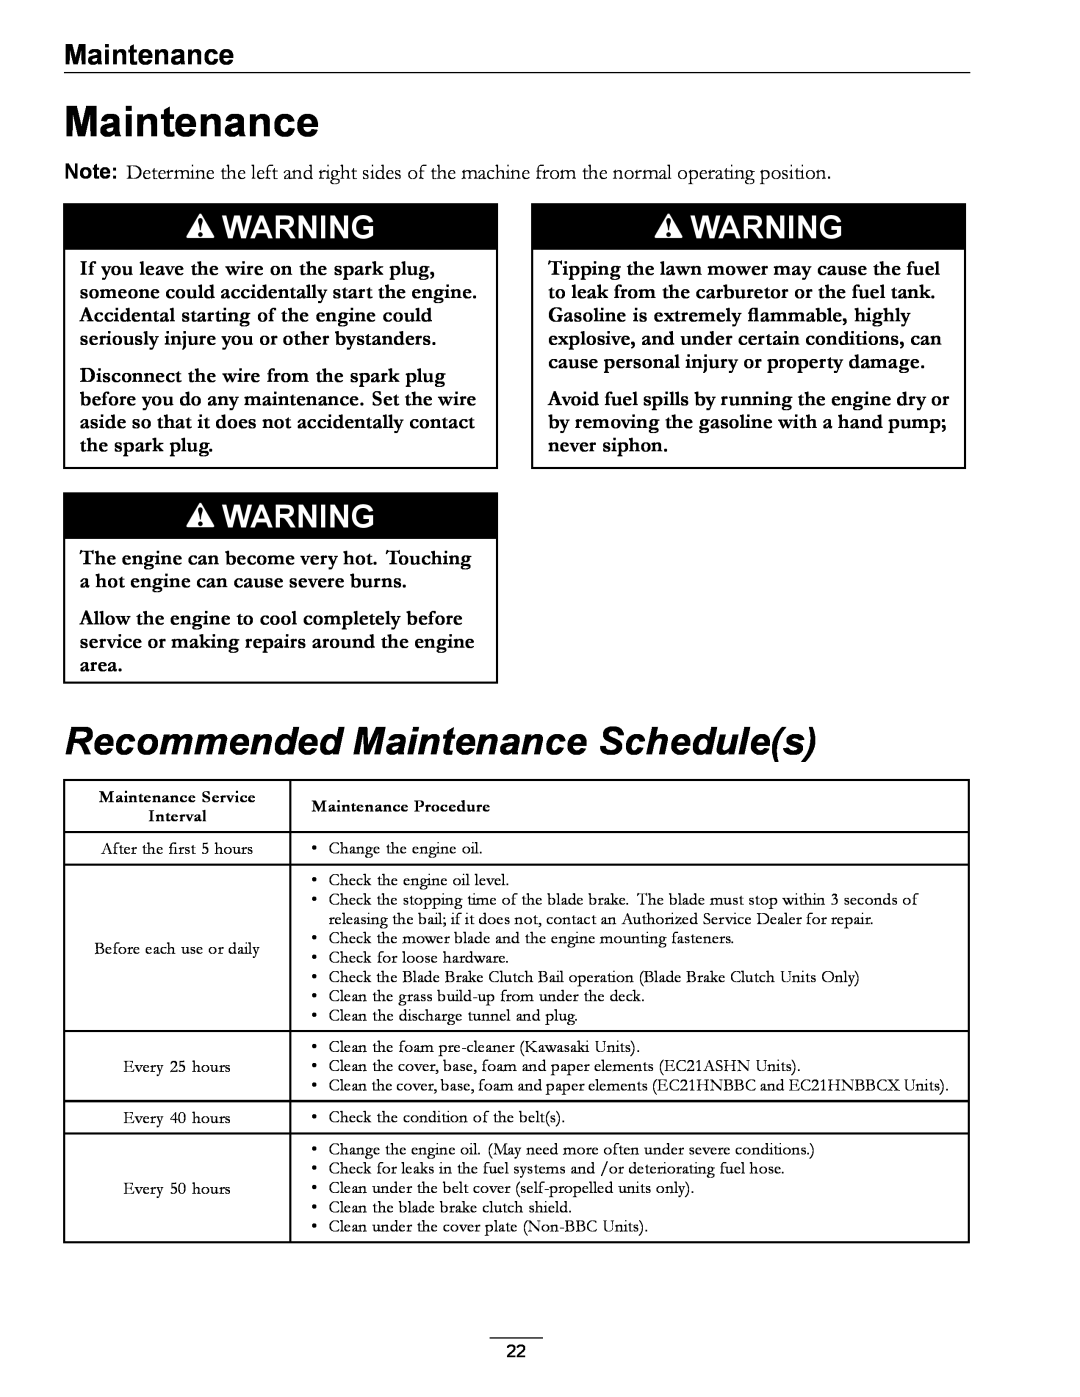 Exmark 000 & higher, 850 manual Recommended Maintenance Schedules 